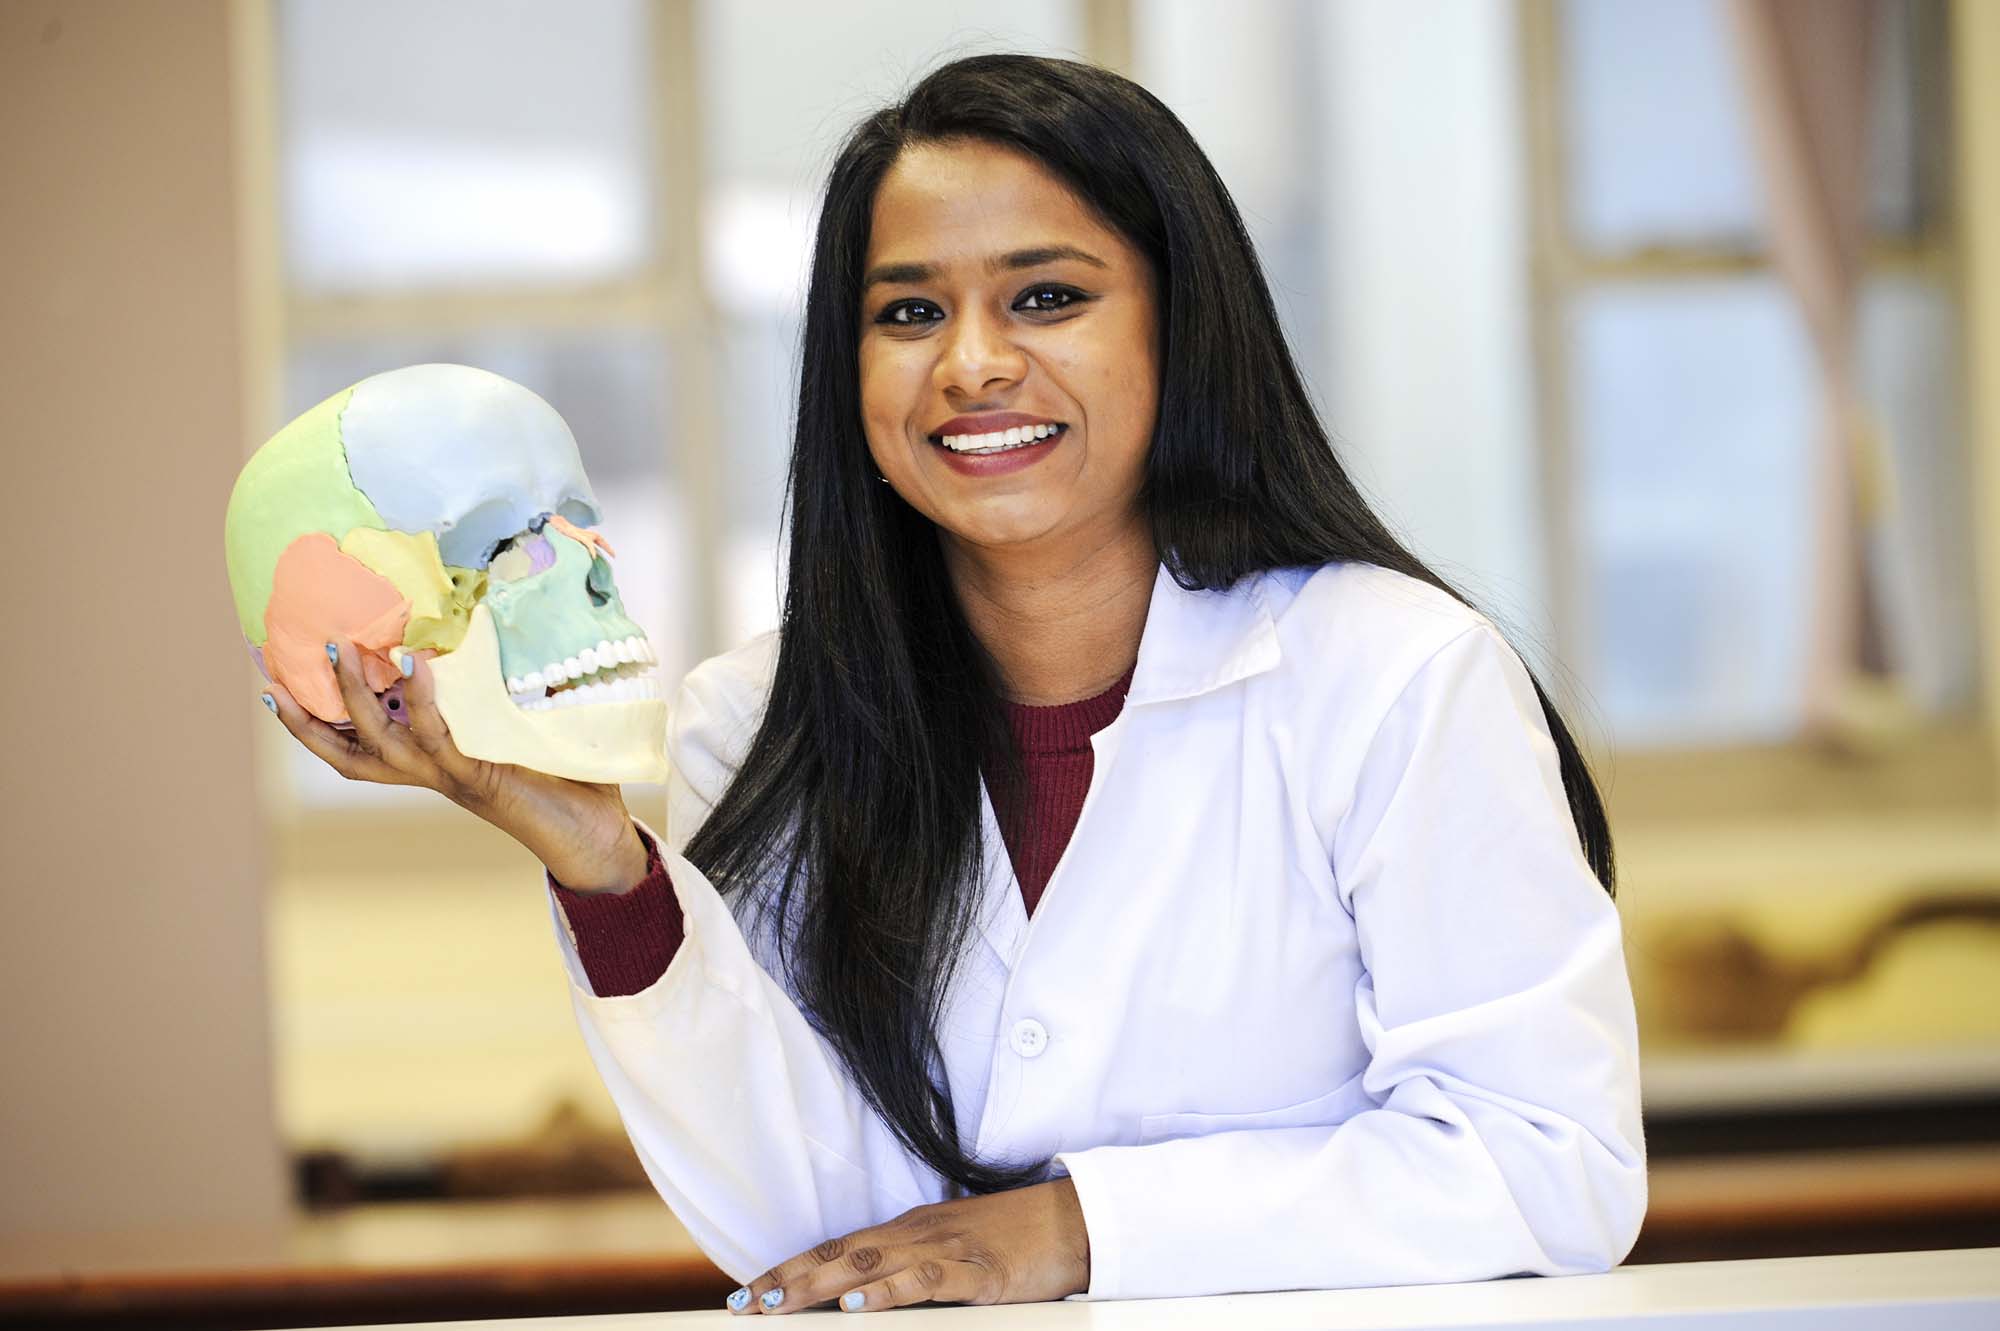 Jeshika Luckrajh is a lecturer in the Division of Clinical Anatomy and Biological Anthropology in the Faculty of Health Sciences.